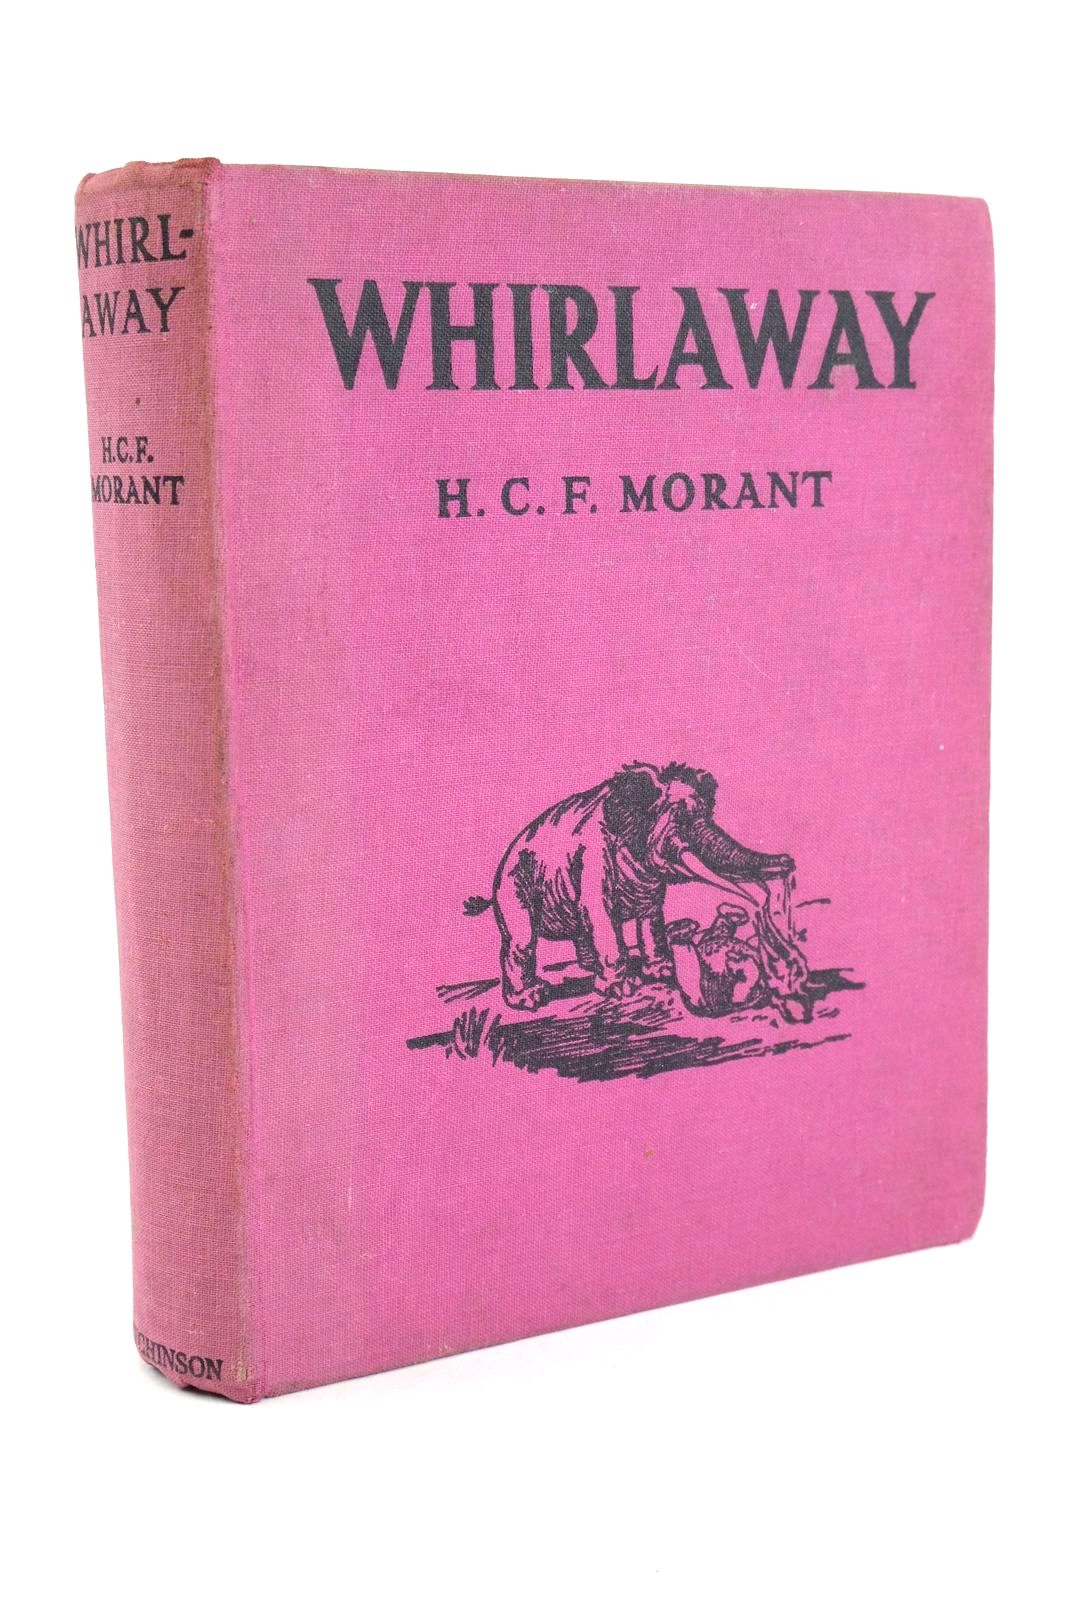 Photo of WHIRLAWAY: A STORY OF THE AGES- Stock Number: 1327686